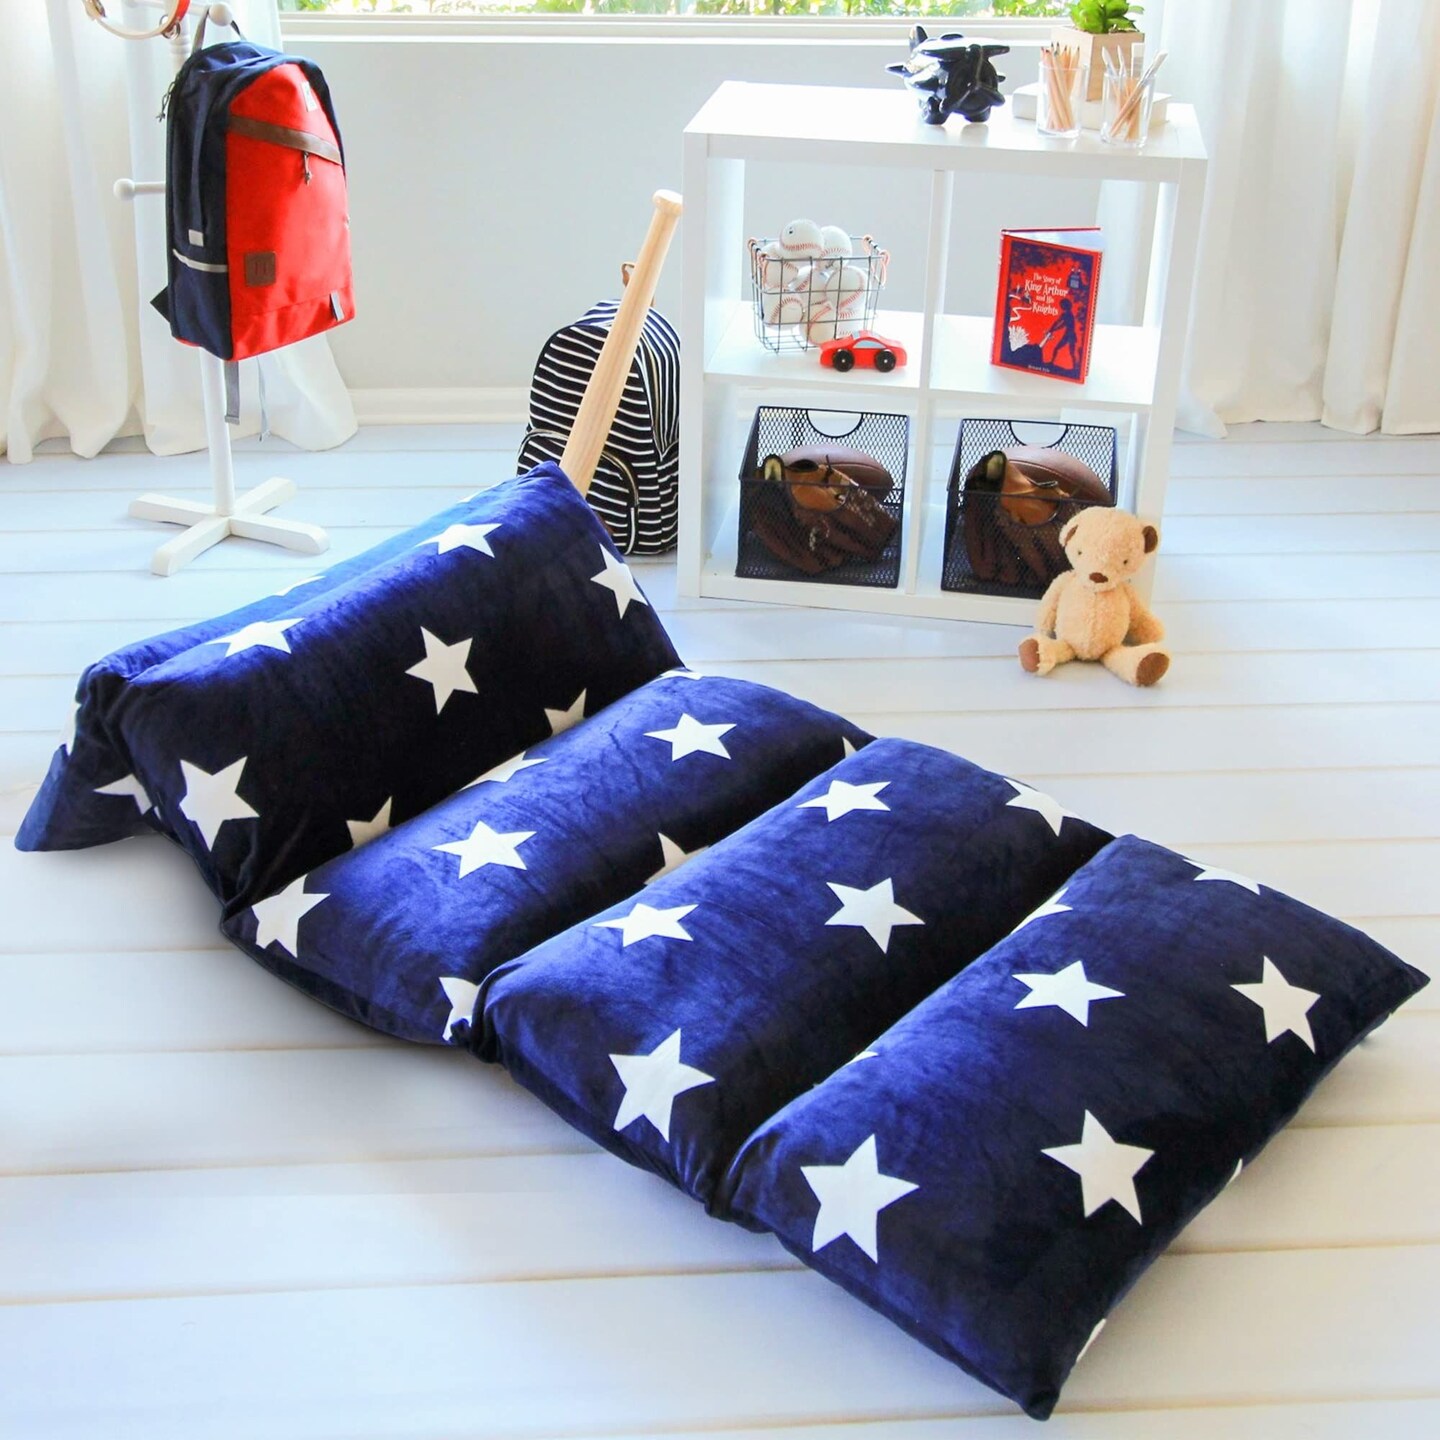 Butterfly Craze Floor Pillow Case, Mattress Bed Lounger Cover, Star Navy, Queen, Cozy Seating Solution for Kids &#x26; Adults, Recliner Cushion, Perfect for Reading, TV Time, Sleepovers, &#x26; Toddler Nap Mat